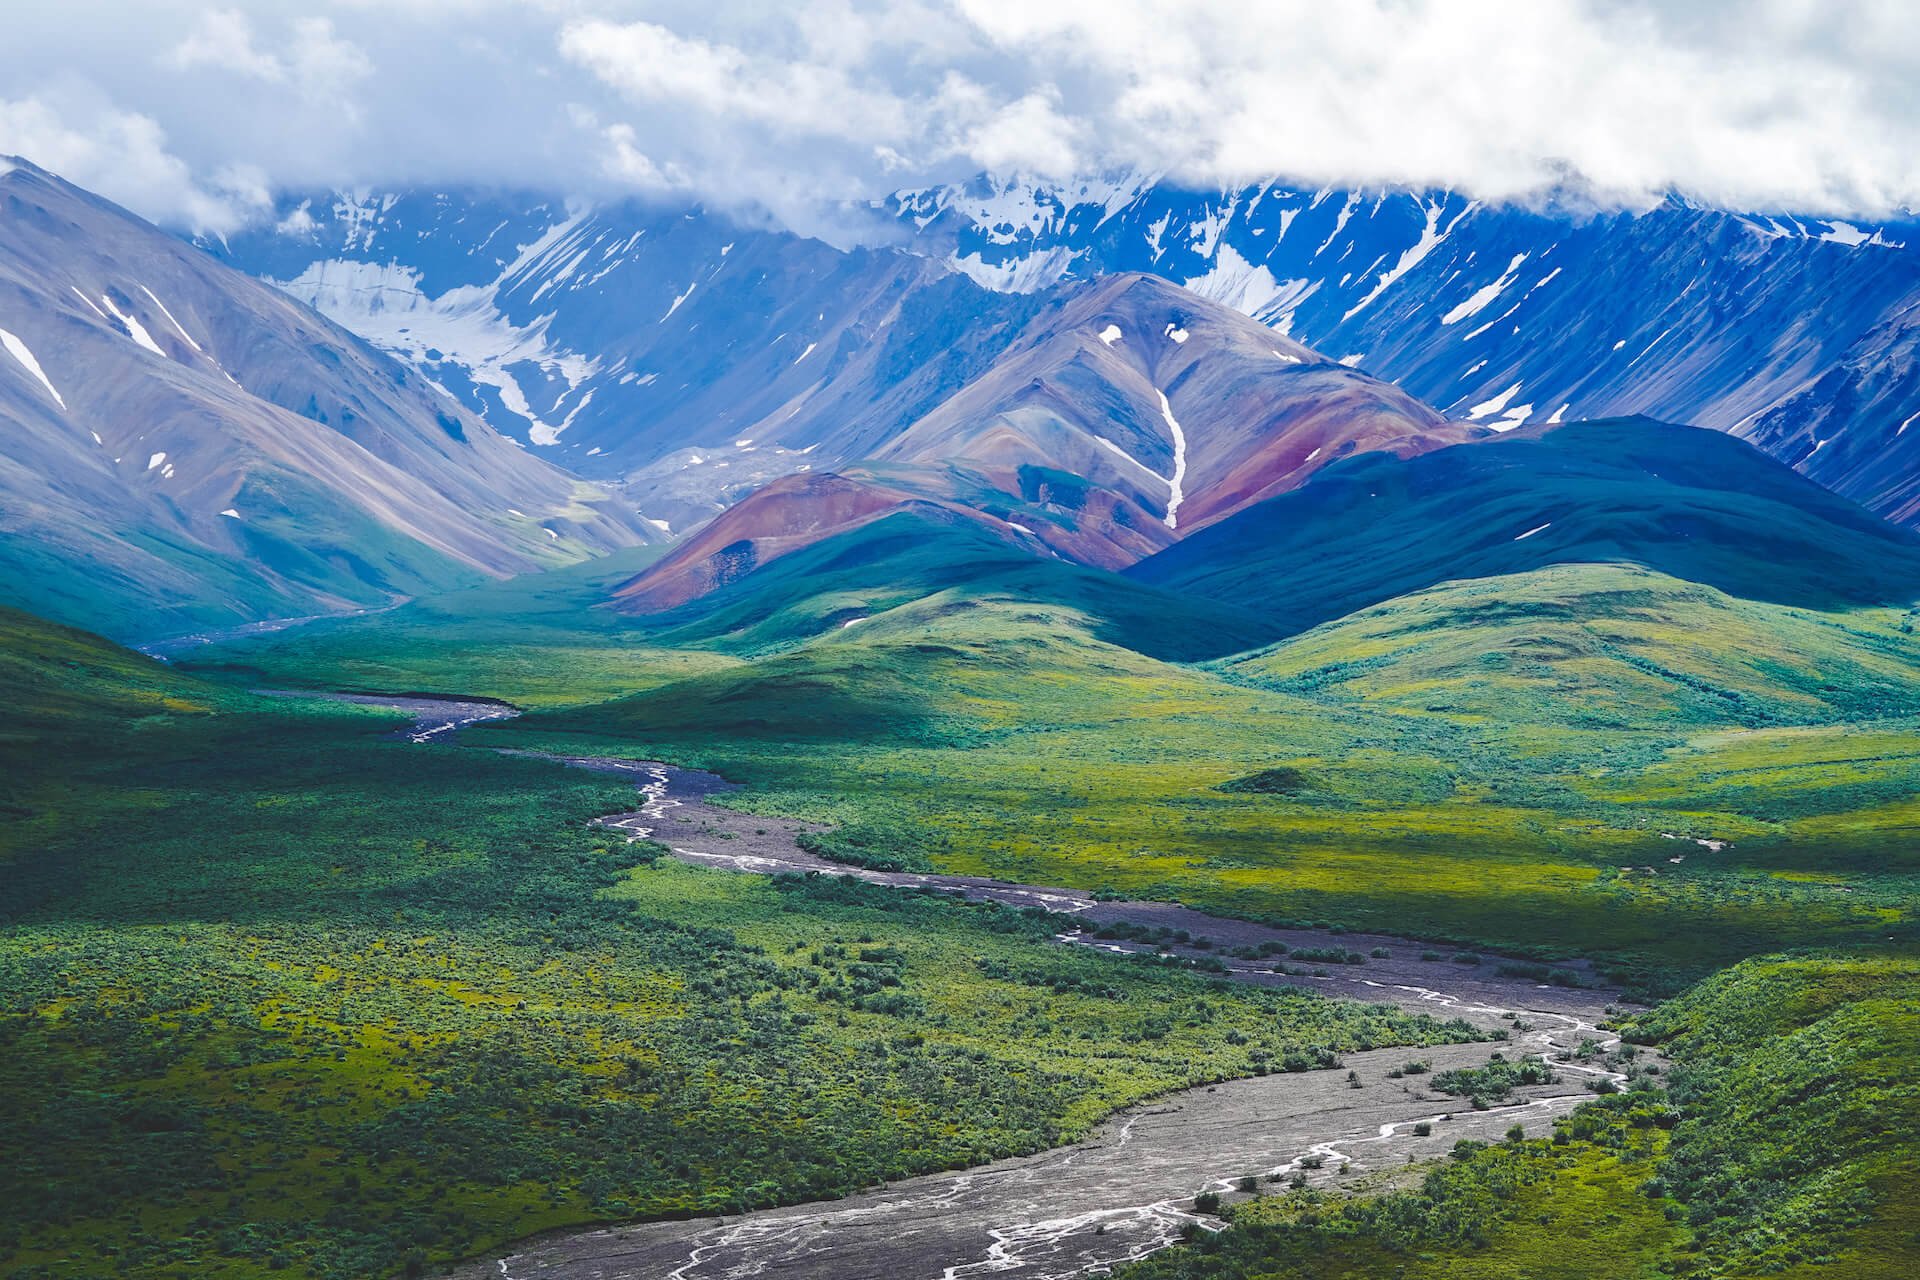 Denali National Park: What to See if You Only Have a Weekend